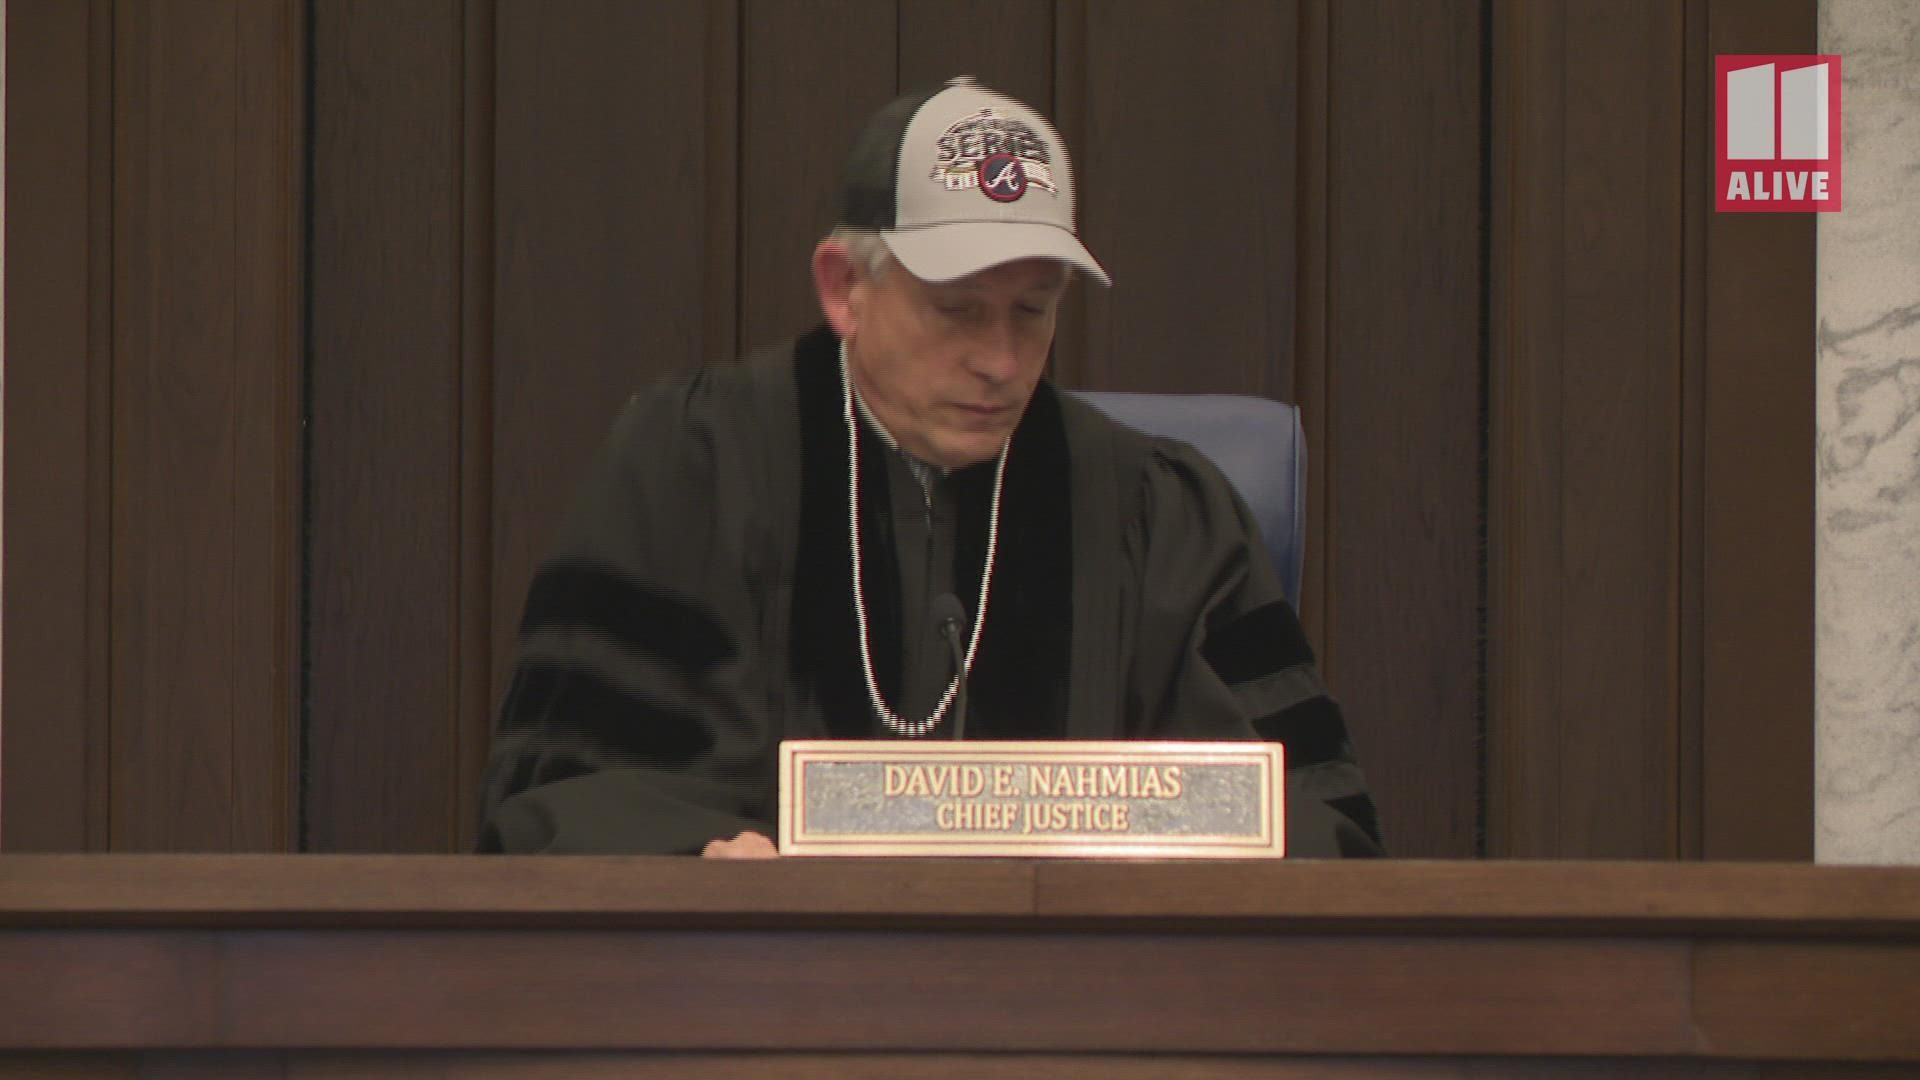 During the session, all nine of the state's justices sported Braves baseball caps, along with pearls.